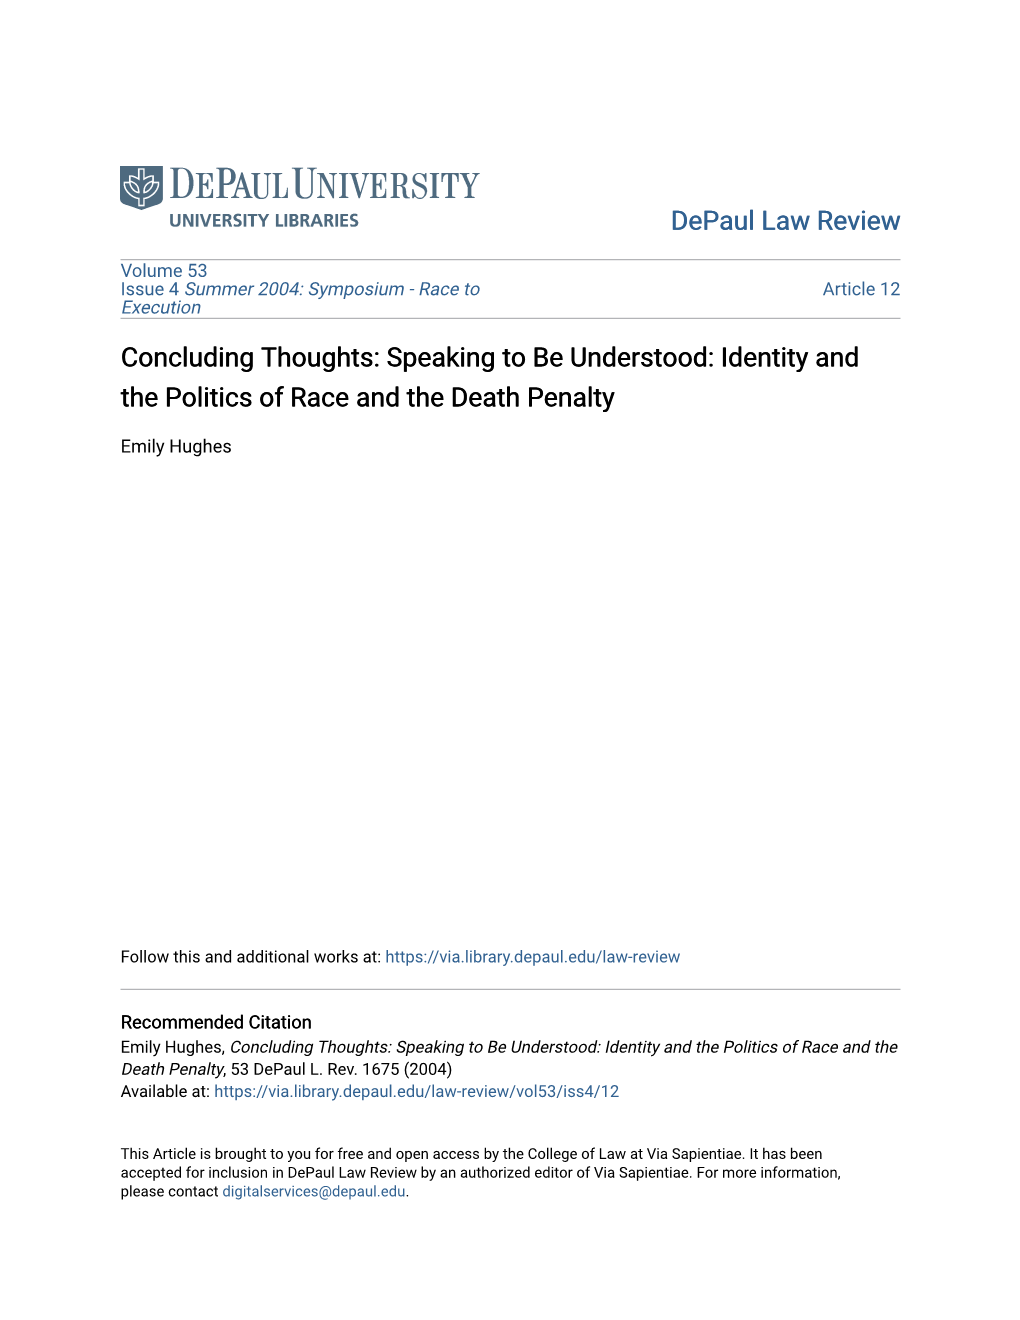 Concluding Thoughts: Speaking to Be Understood: Identity and the Politics of Race and the Death Penalty